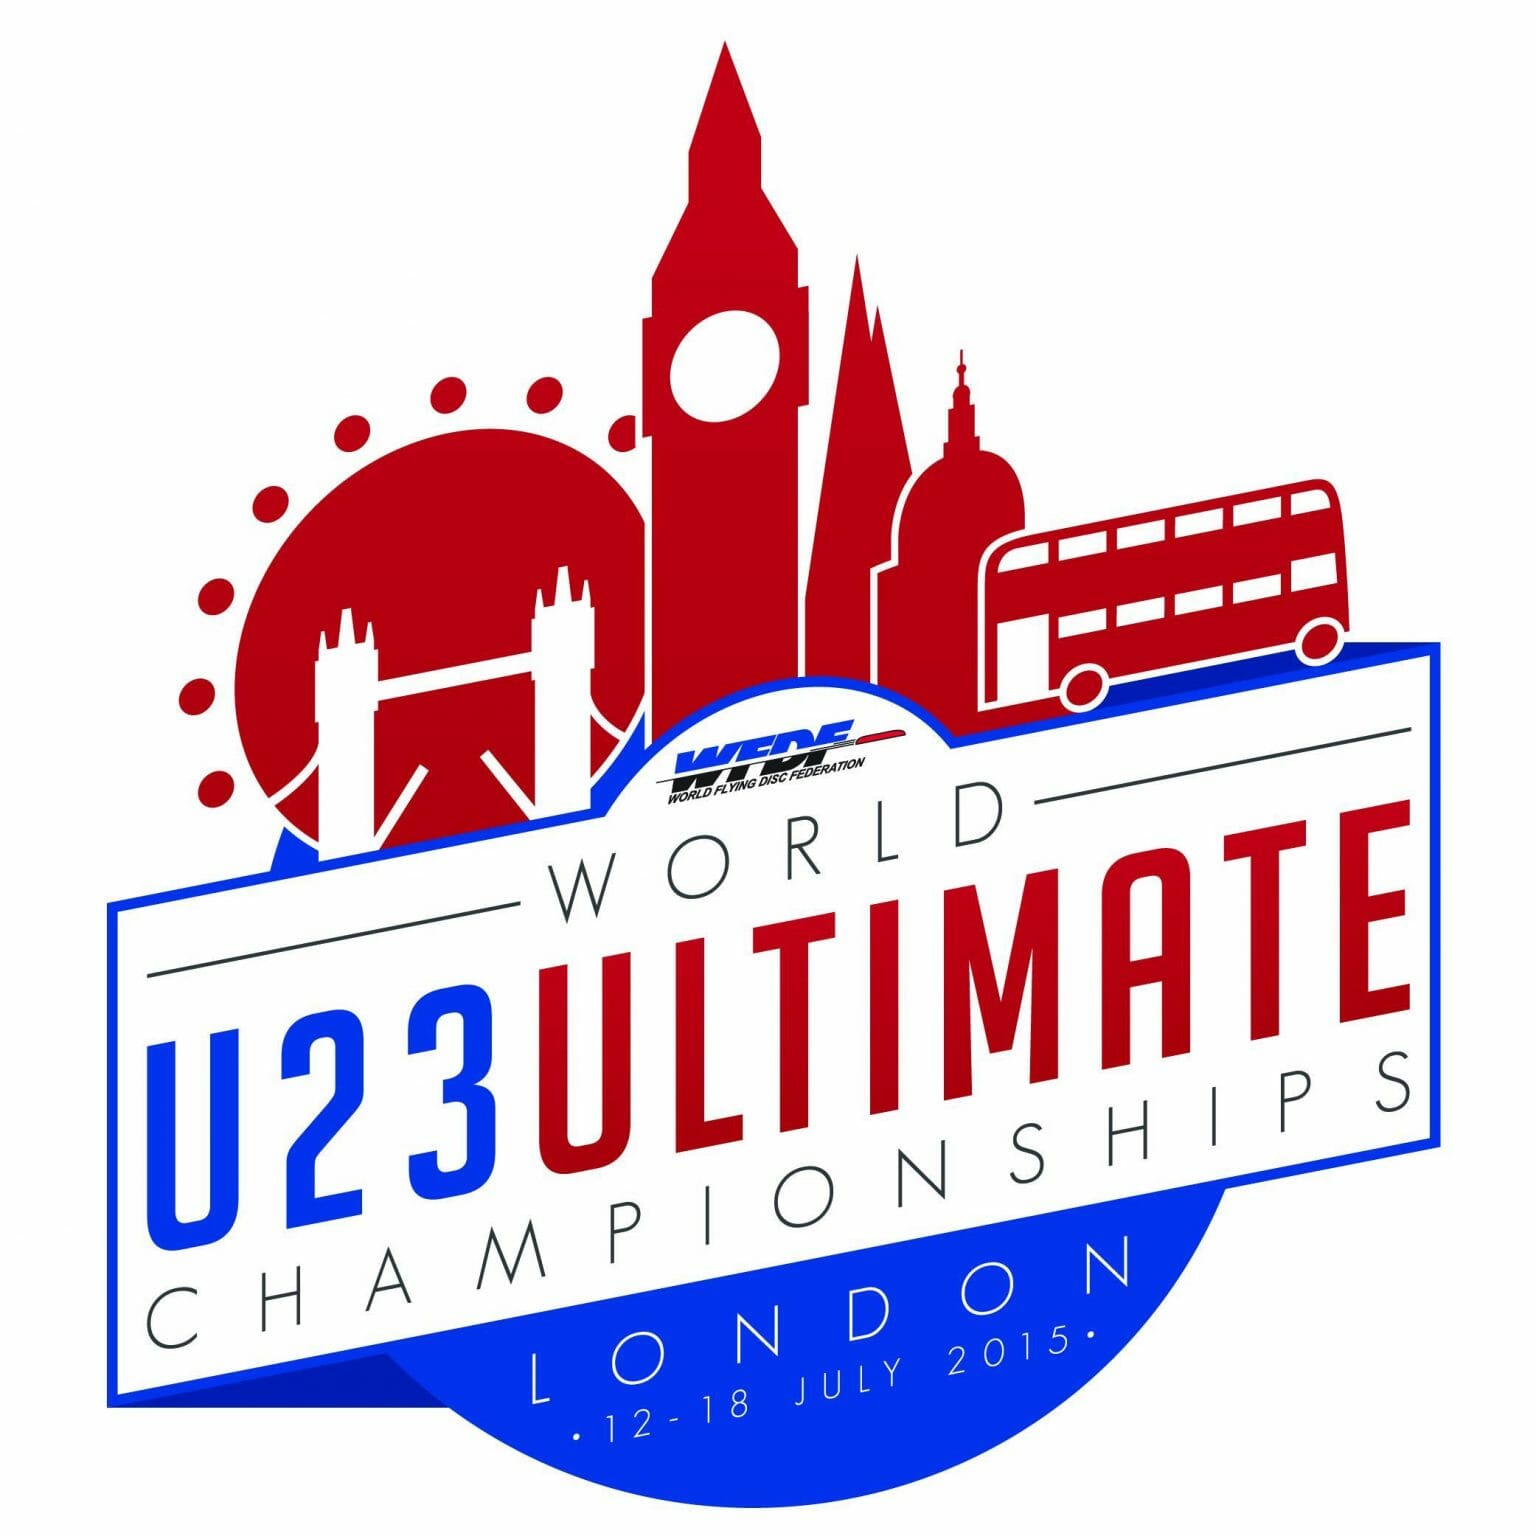 U23 Worlds 2015 International Team Previews, Presented By VC Ultimate